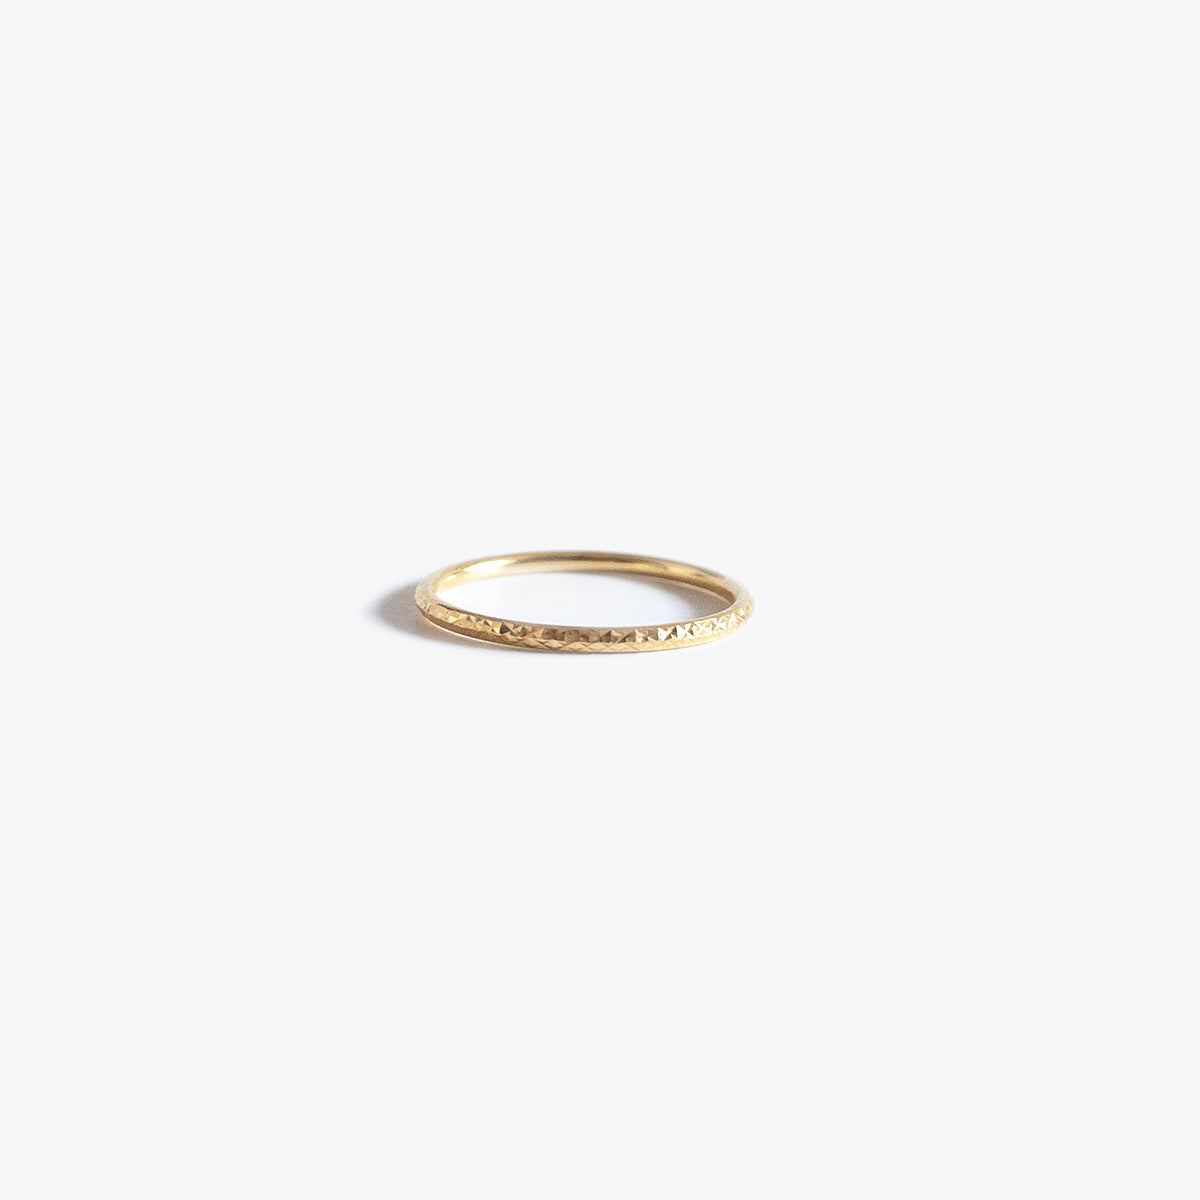 The Fine Textured Ring in Solid Gold